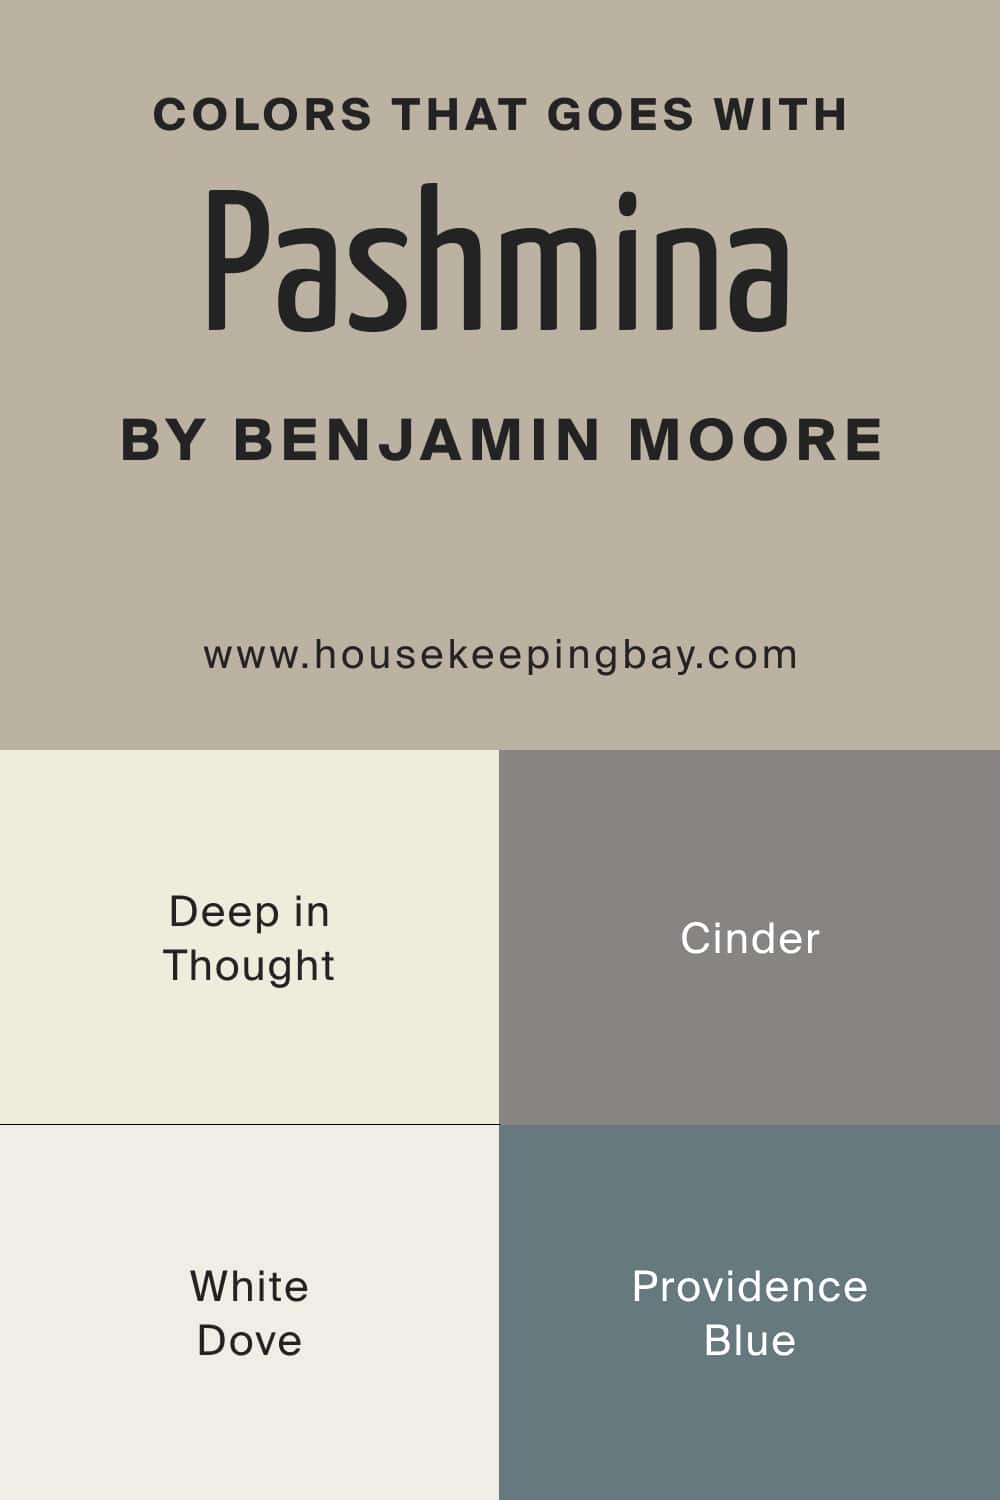 Colors that goes with Pashmina AF 100 by Benjamin Moore